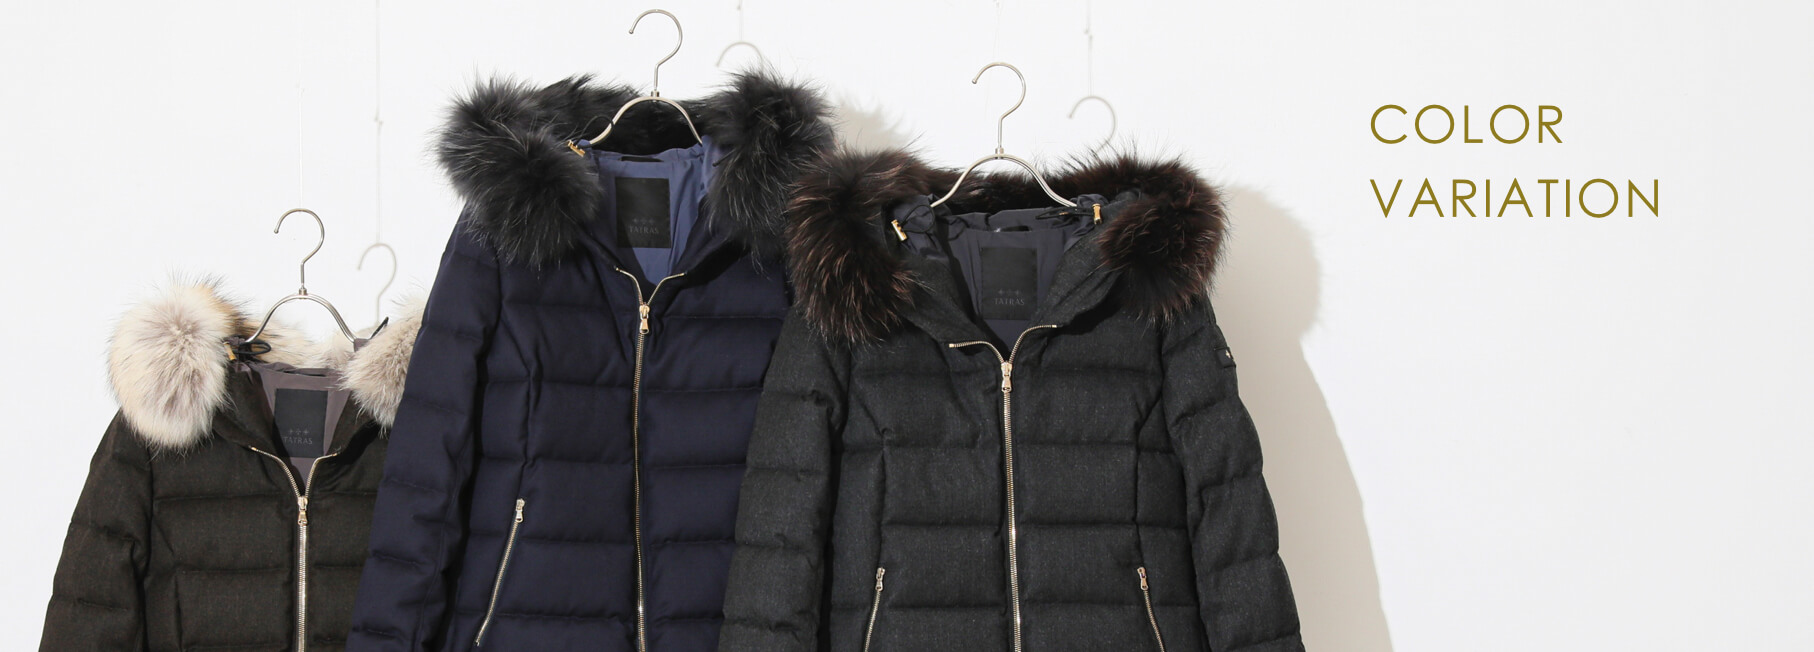 Spick and Span｜NEW OUTER-WOOLRICH -TATRAS｜Spick & Span｜特集